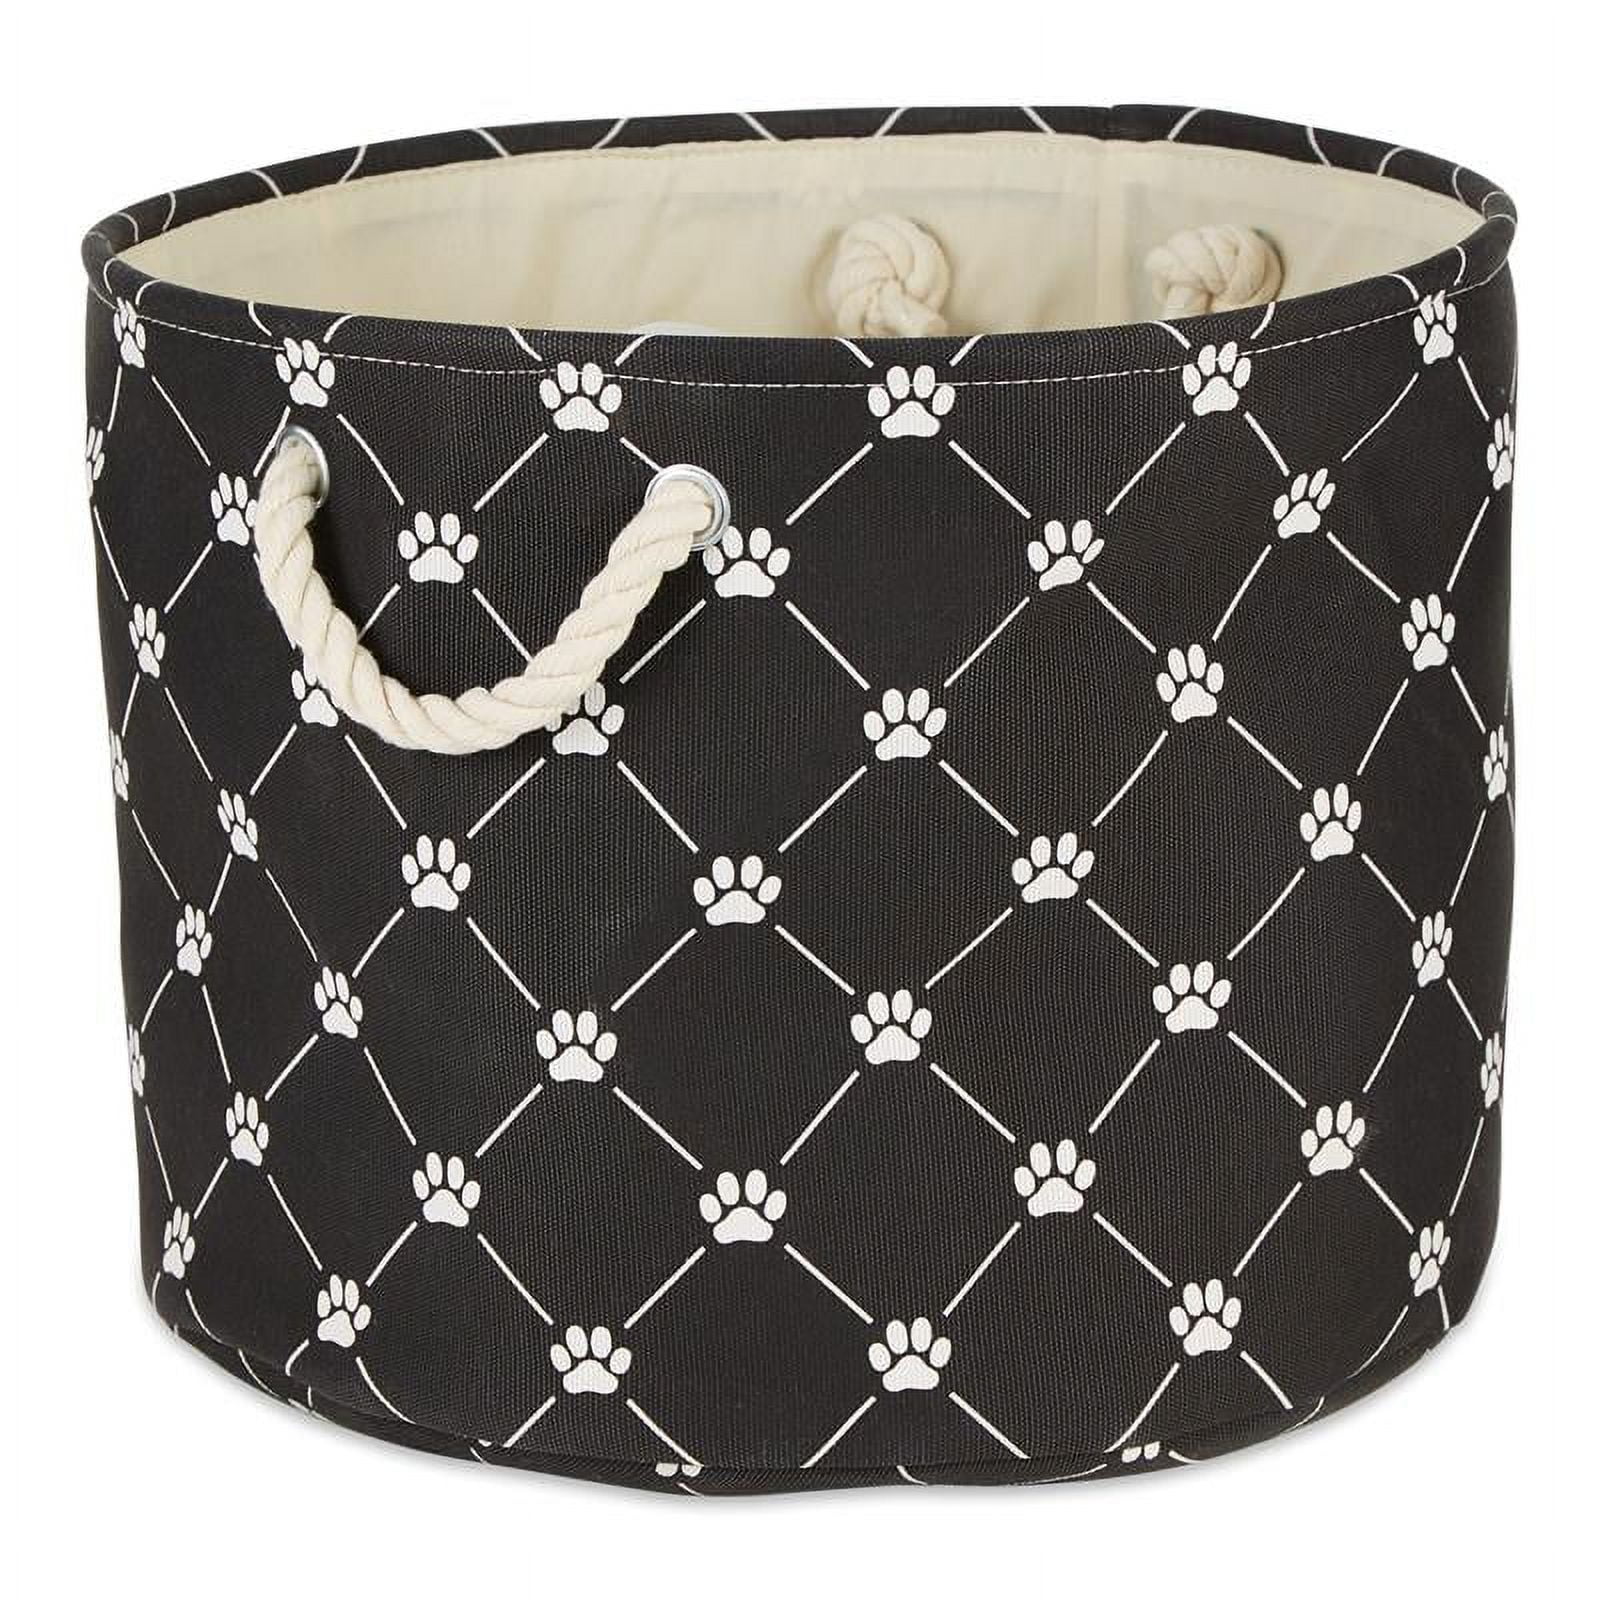 Picture of Design Imports CAMZ14214 Polyester Trellis Paw Round Pet Bin, Black - Small